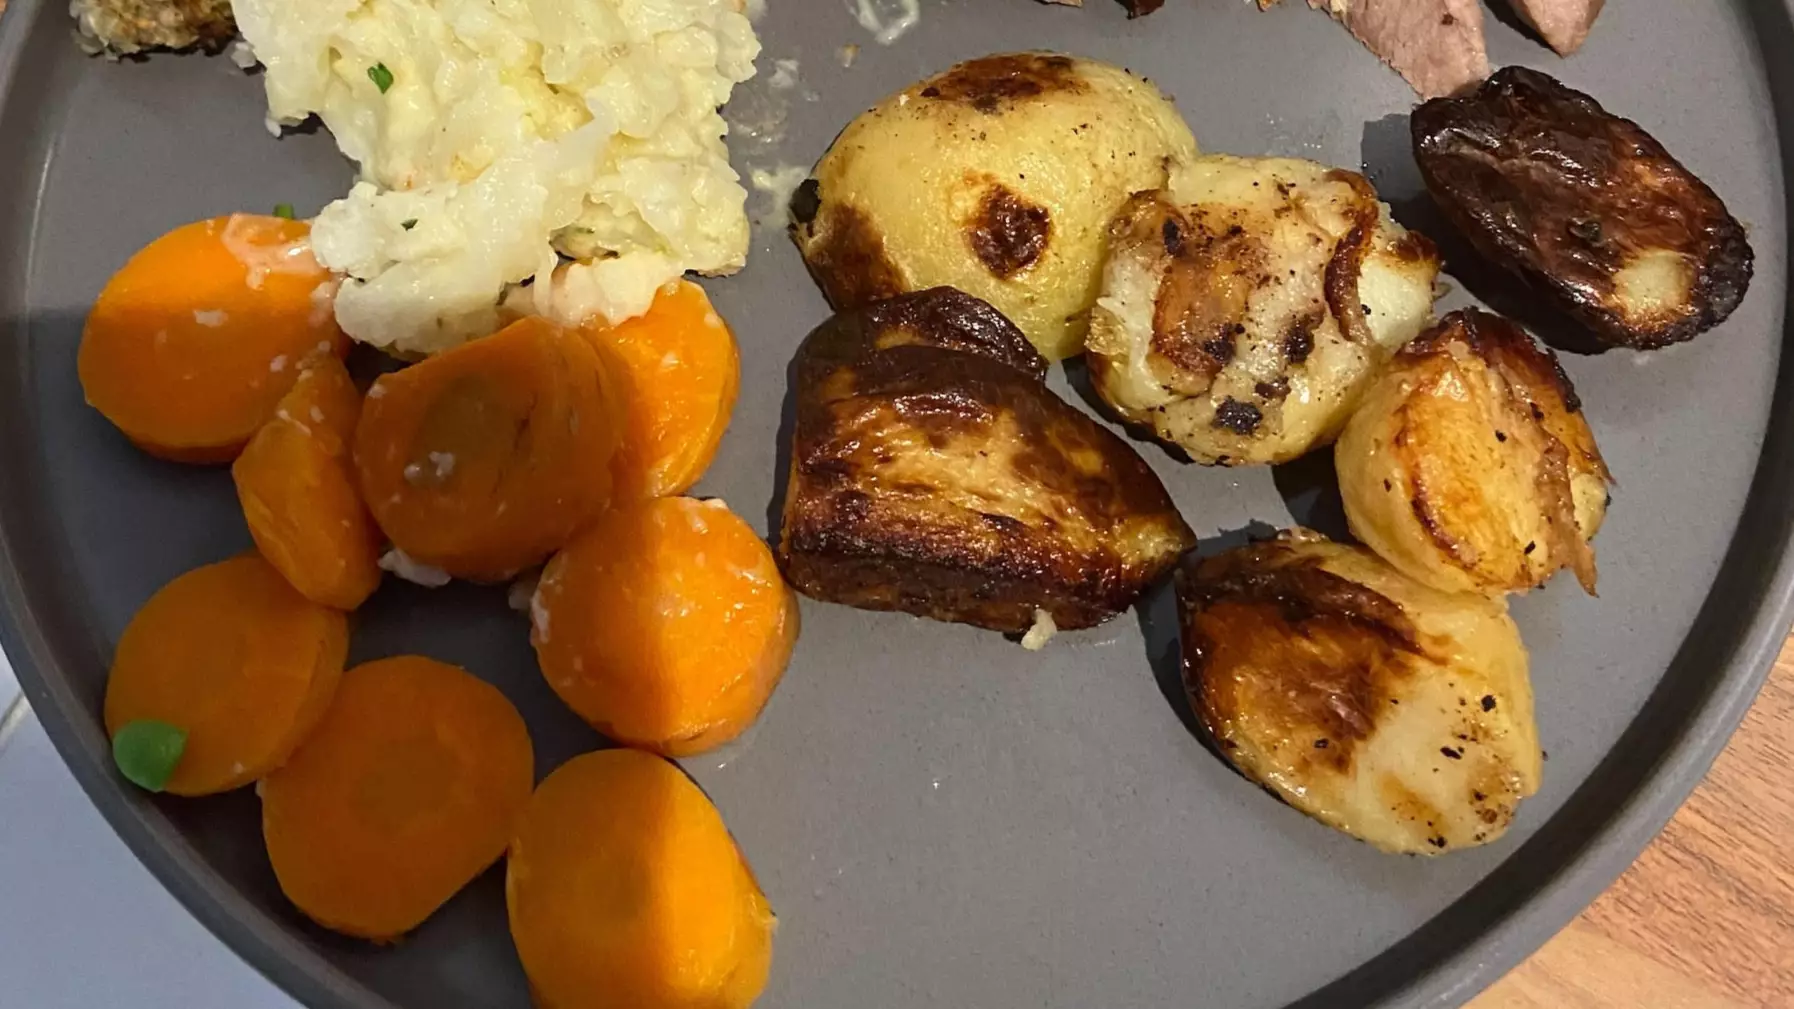 Woman Slams £17 Takeaway Saying It's 'The Worst' Roast Dinner She's Ever Had 